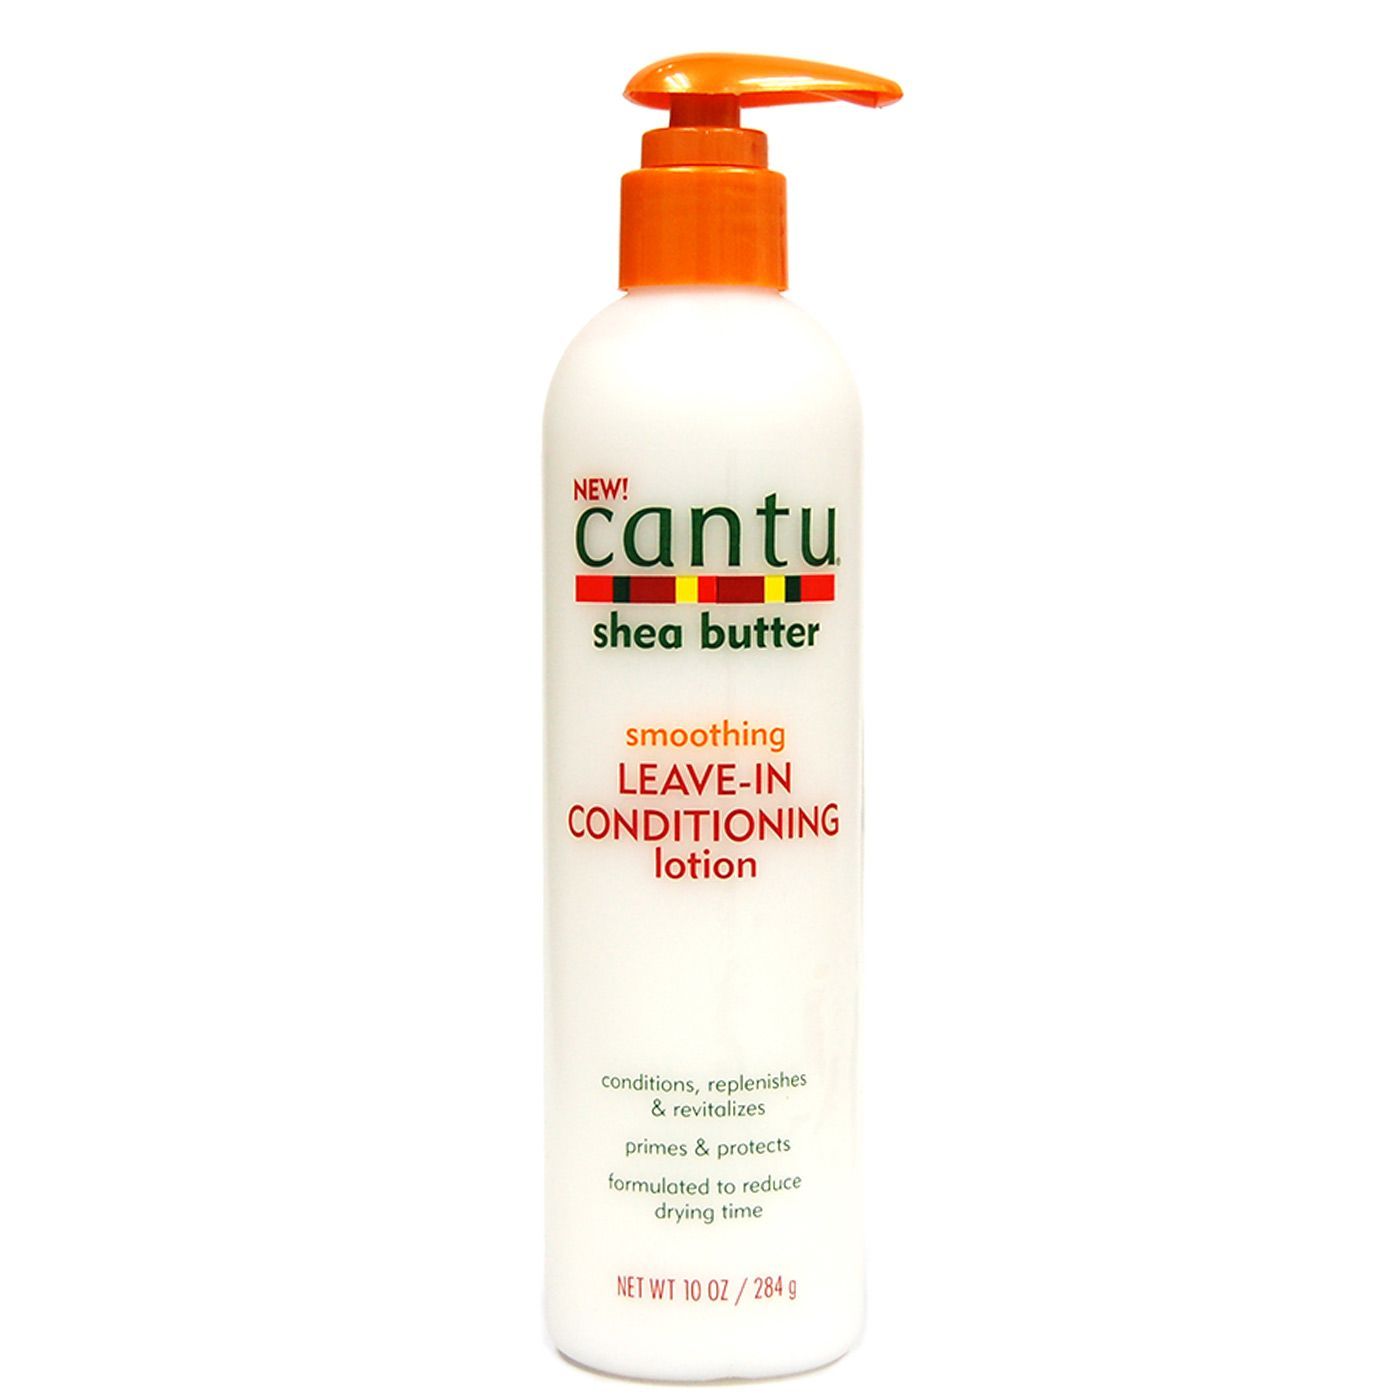 Cantu Shea Butter Smoothing Leave-in Conditioning Lotion - 284g